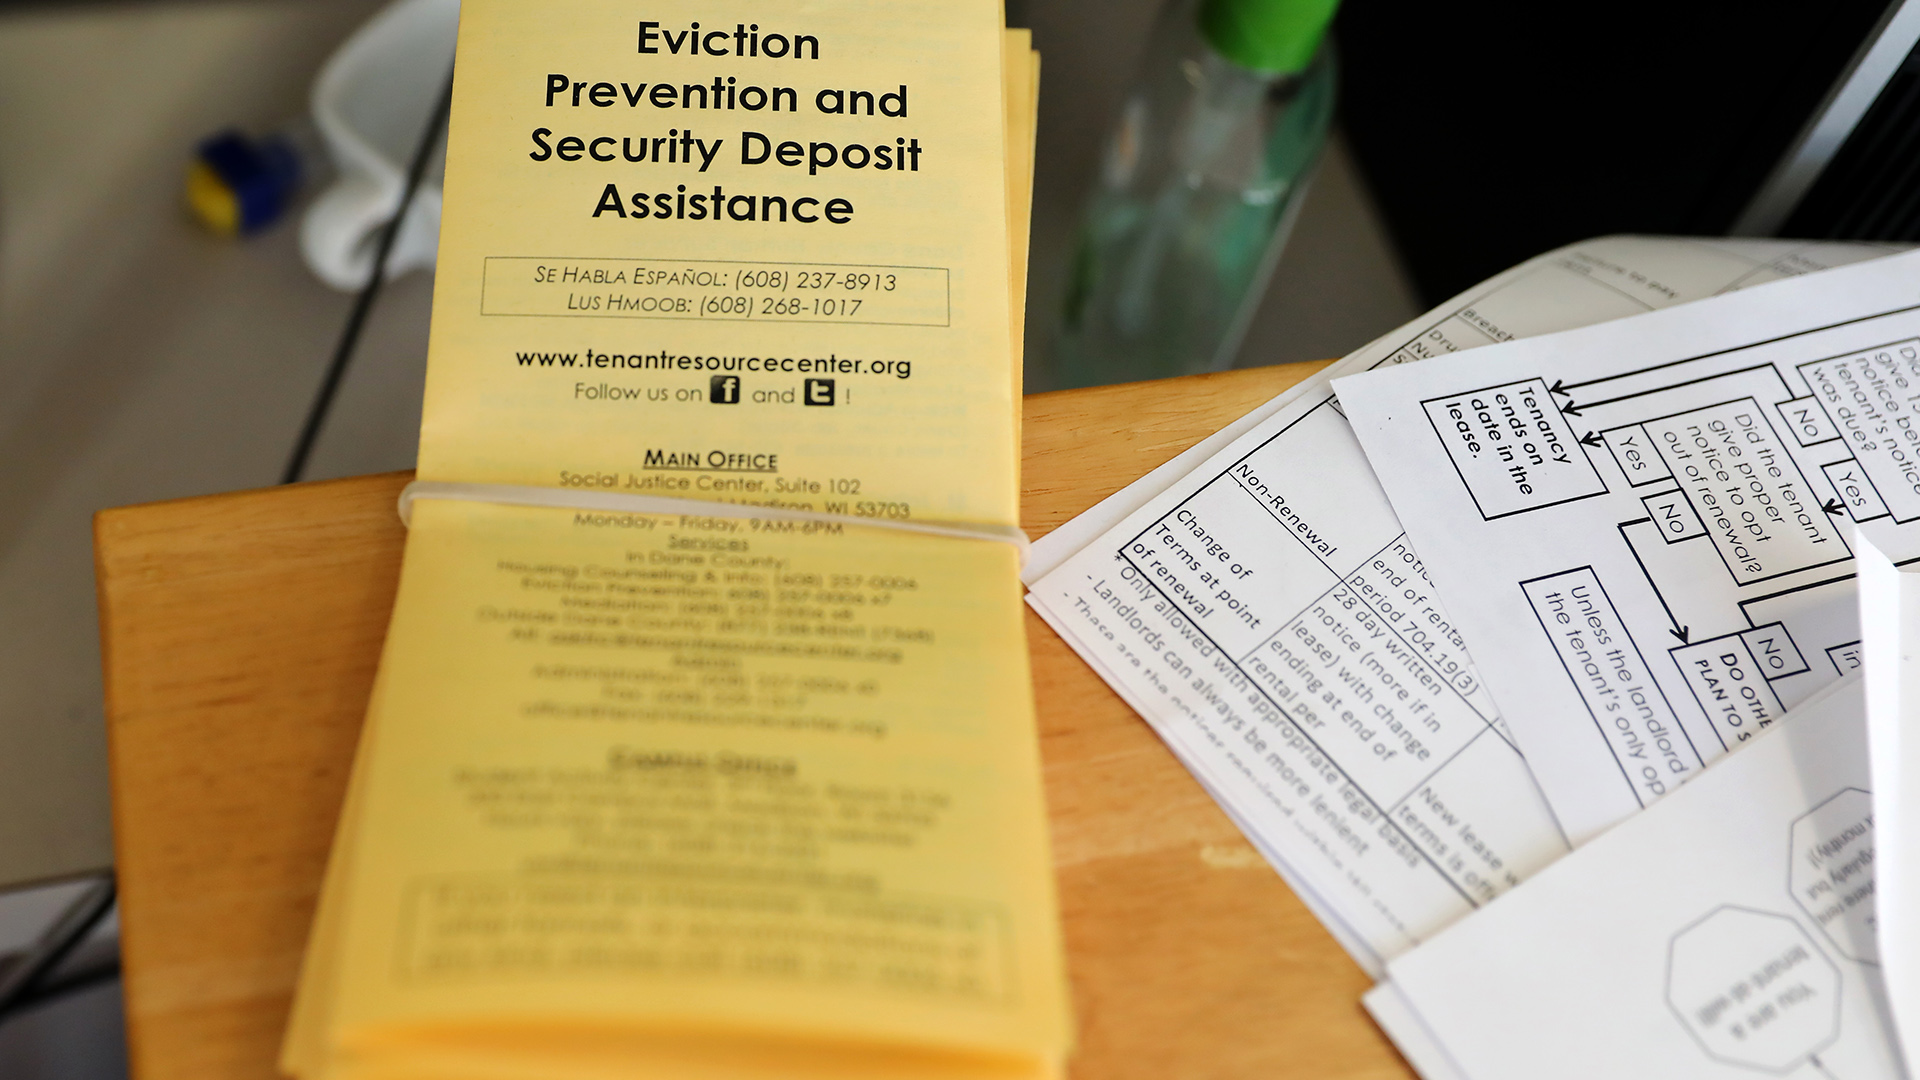 A stack of pamphlets with the title "Eviction Prevention and Security Deposit Assistance" sit on the top of a table next to other papers showing tables and flowcharts related to the eviction process.